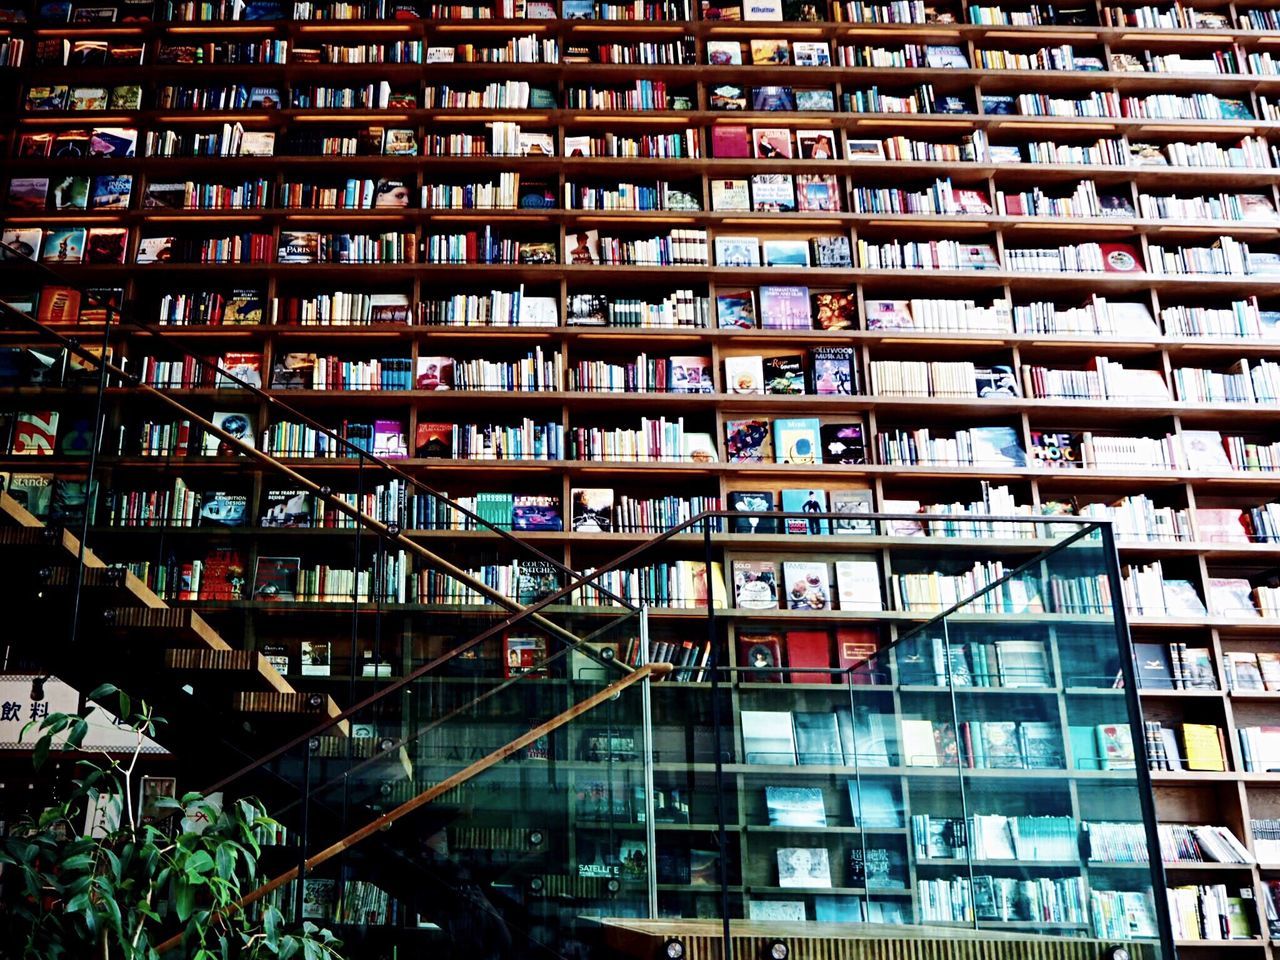 shelf, day, no people, architecture, library, bookshelf, community, outdoors